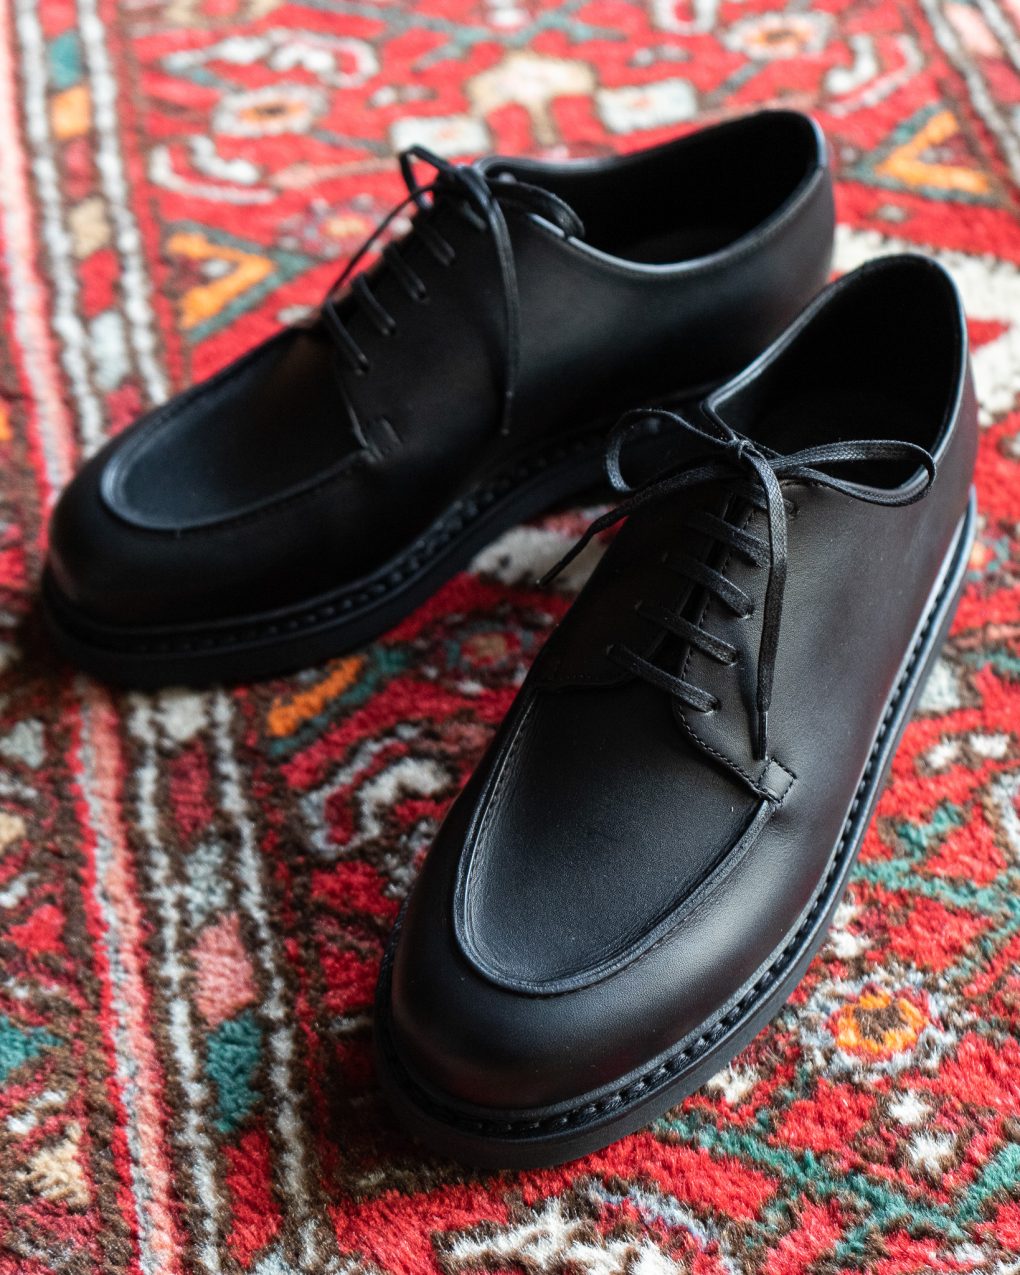 PARABOOT for ARPENTEUR “ONE-CUT” | well-made by MAIDENS SHOP